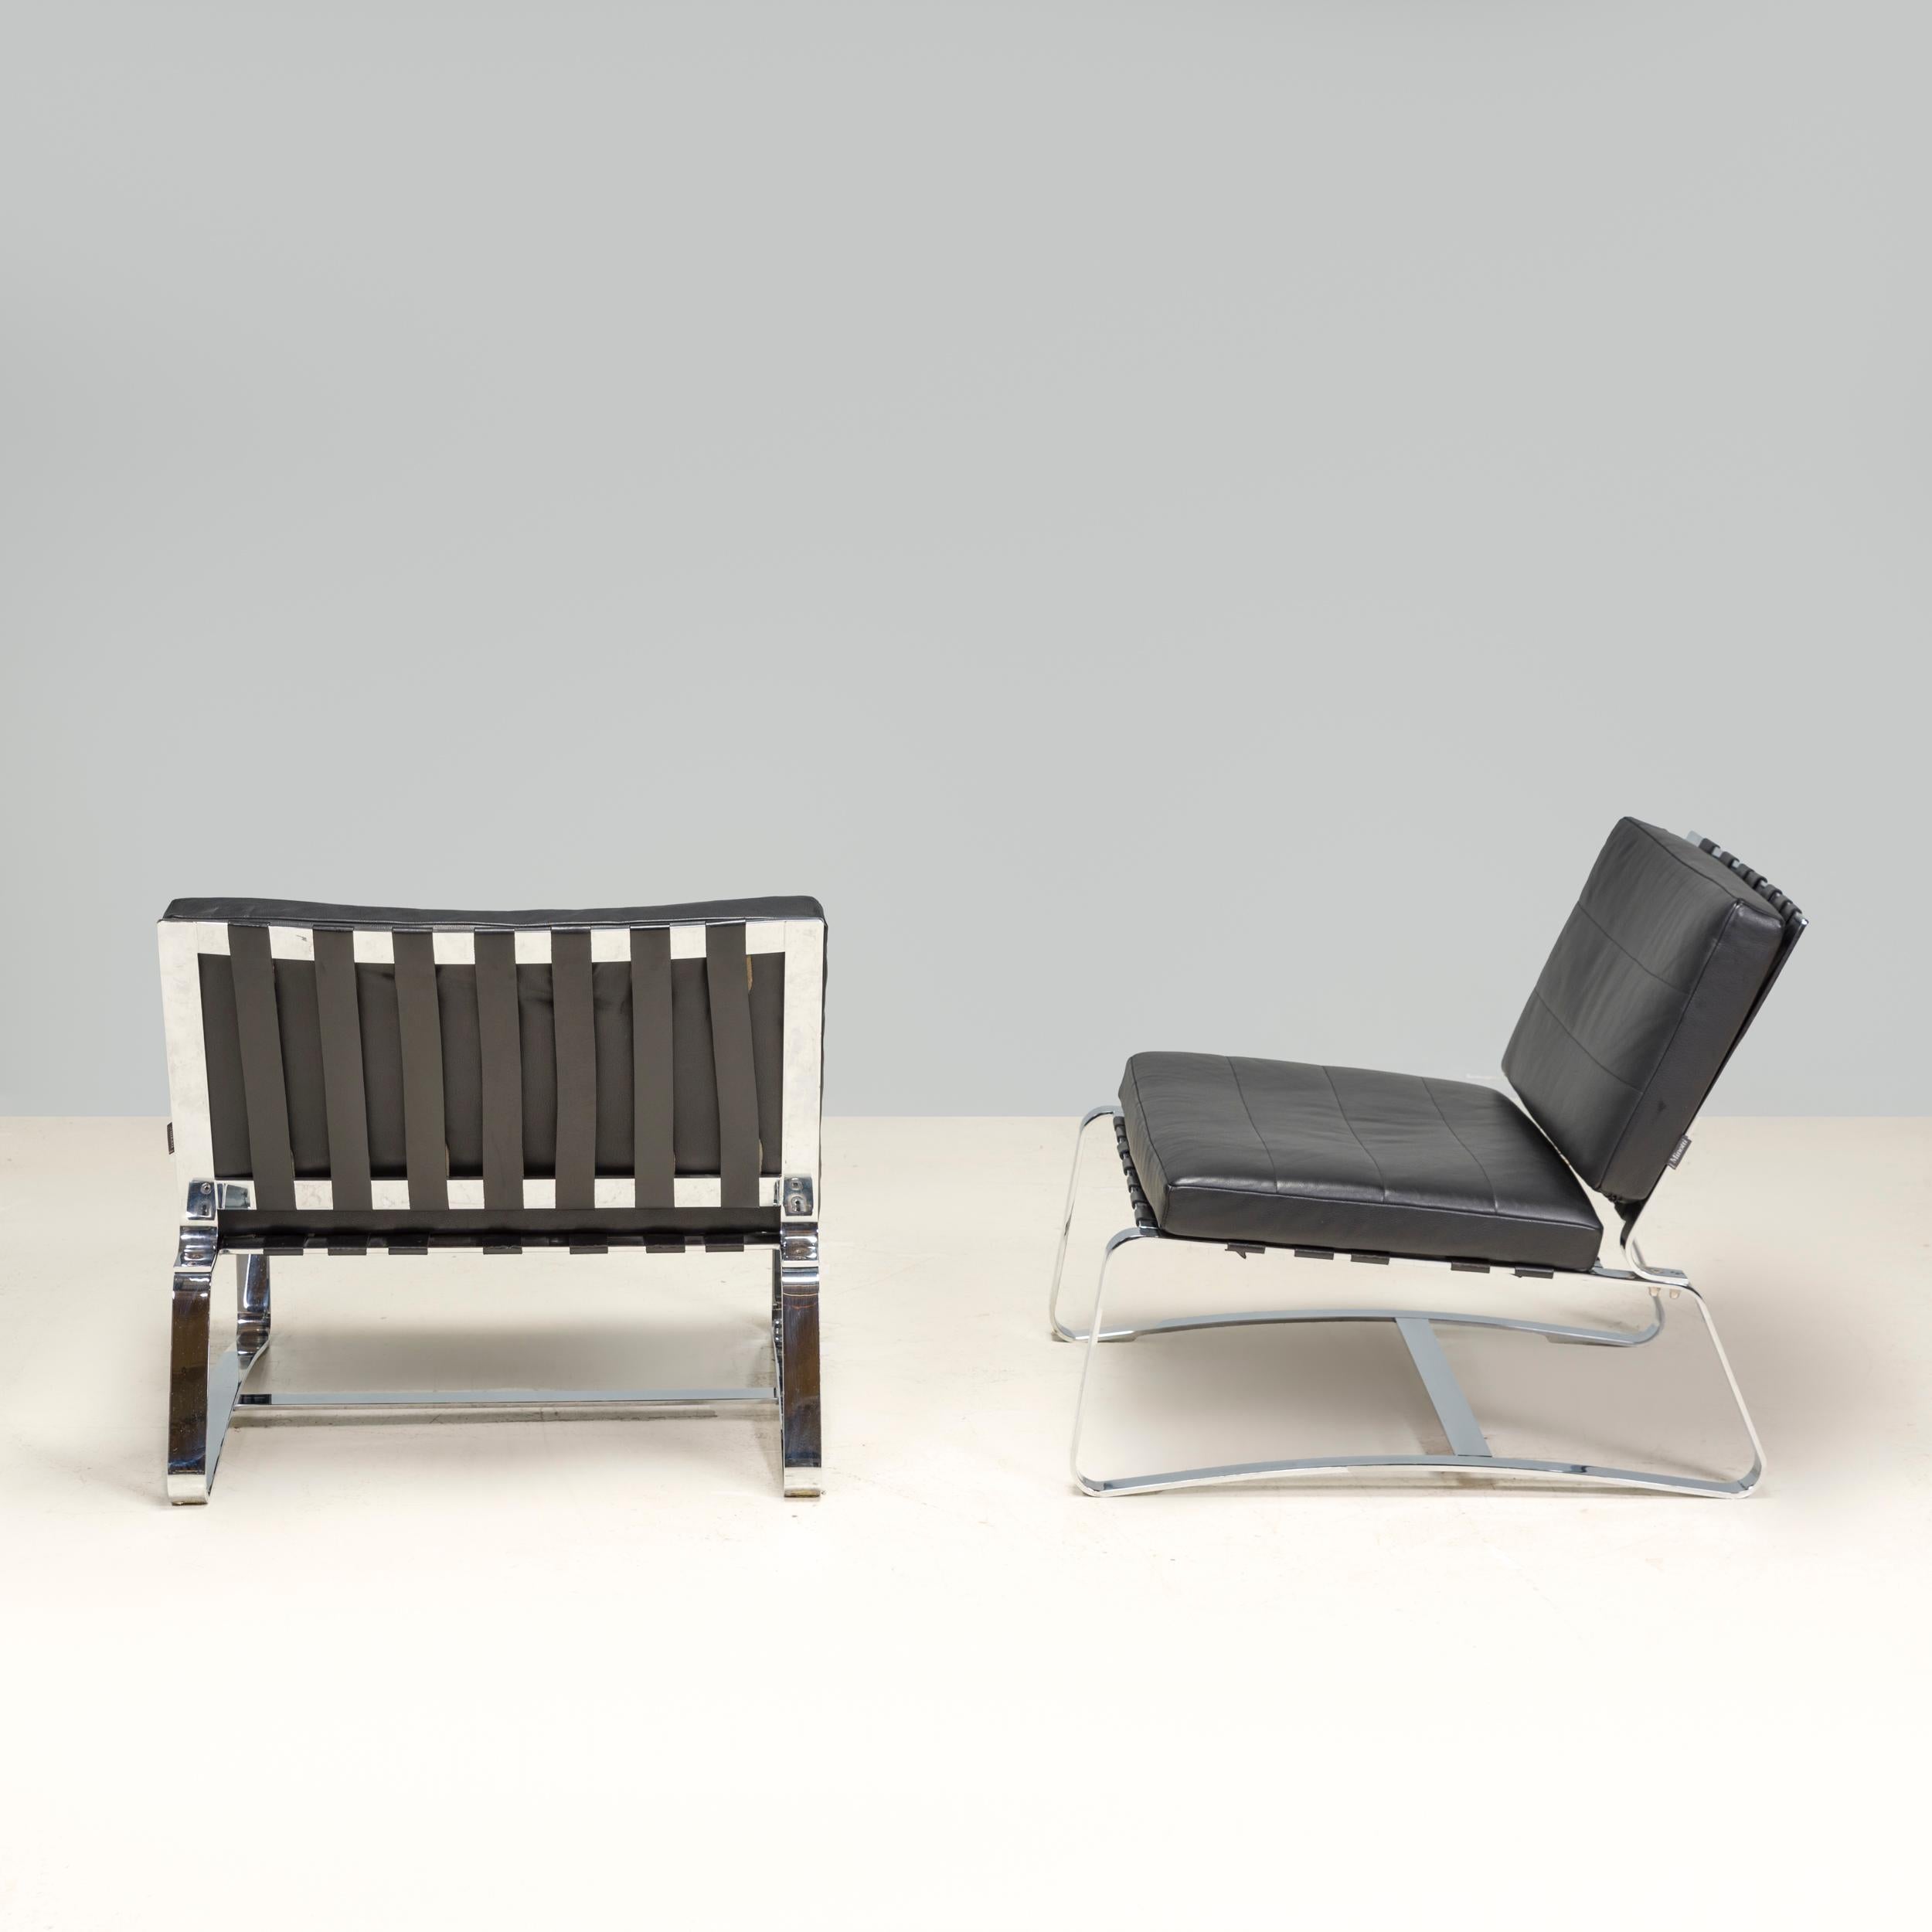 Rodolfo Dordoni for Minotti Black Leather Delaunay Lounge Chair, Set of 2 In Good Condition For Sale In London, GB